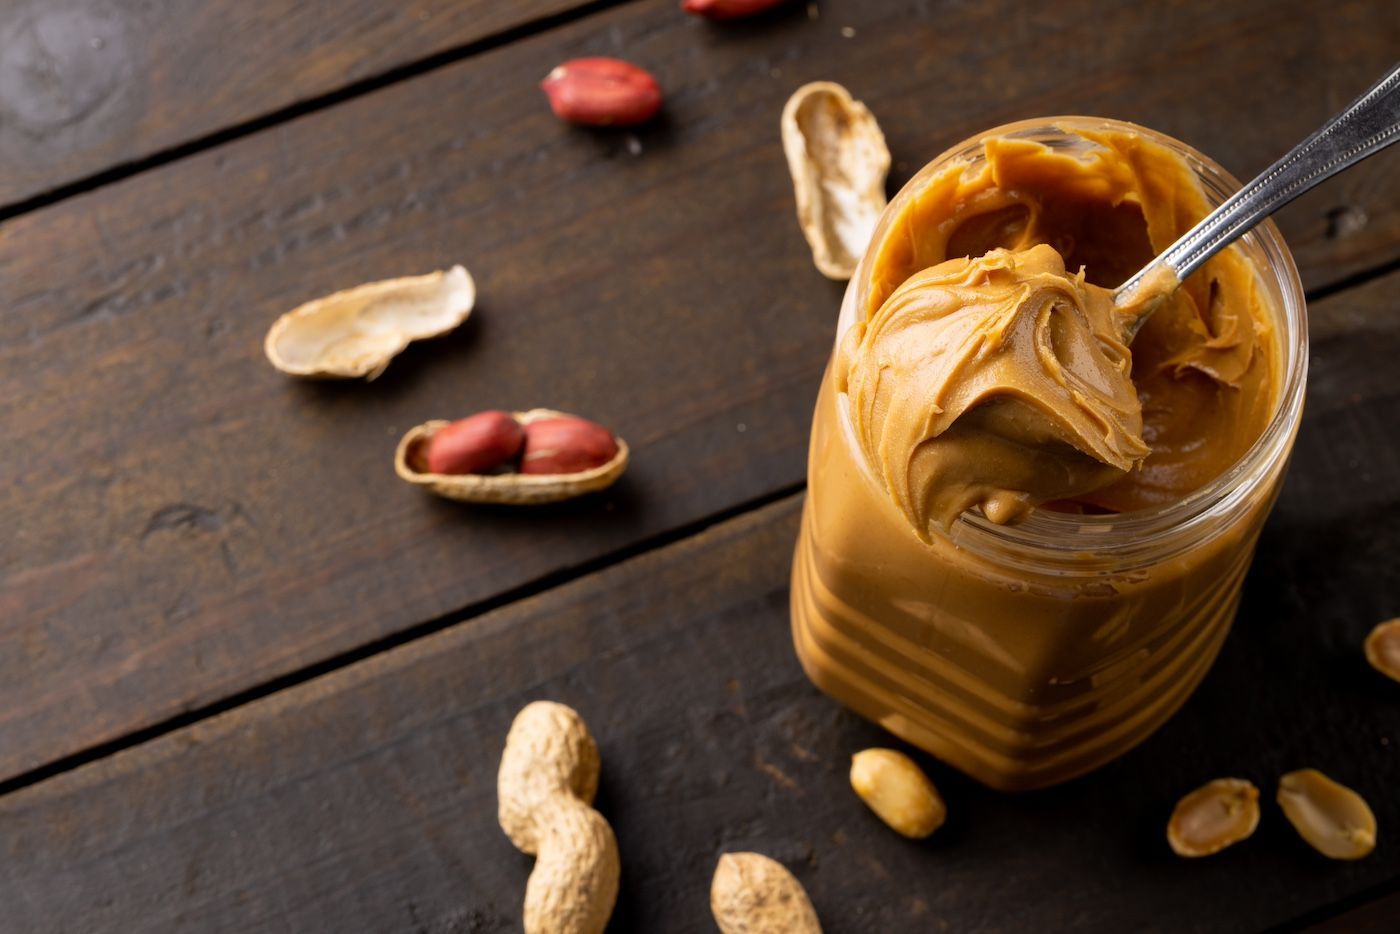 Foods Like Peanut Butter Are Rich in Vitamin E. Learn More From Chews Your Health.